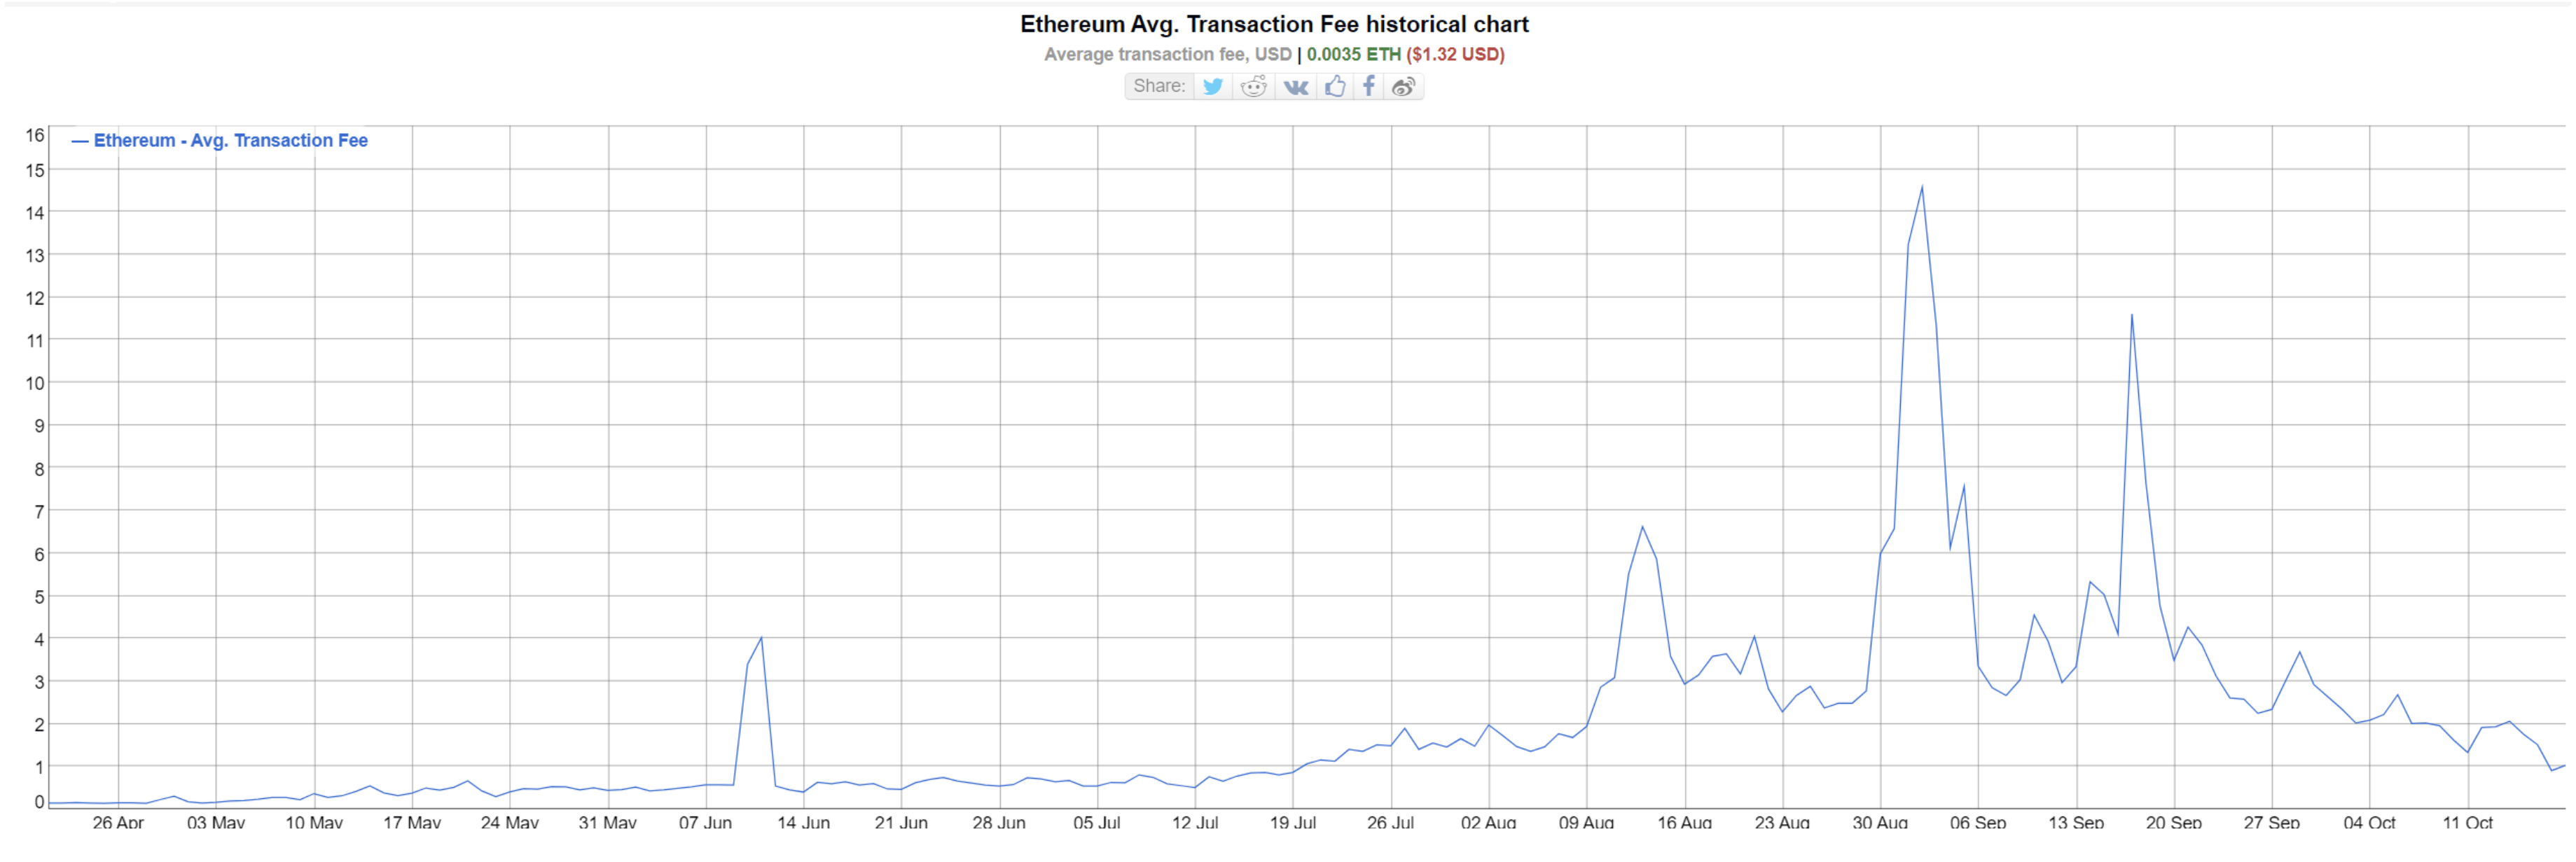 Average Ethereum Transaction Fee Drops To Lowest Since Mid-July